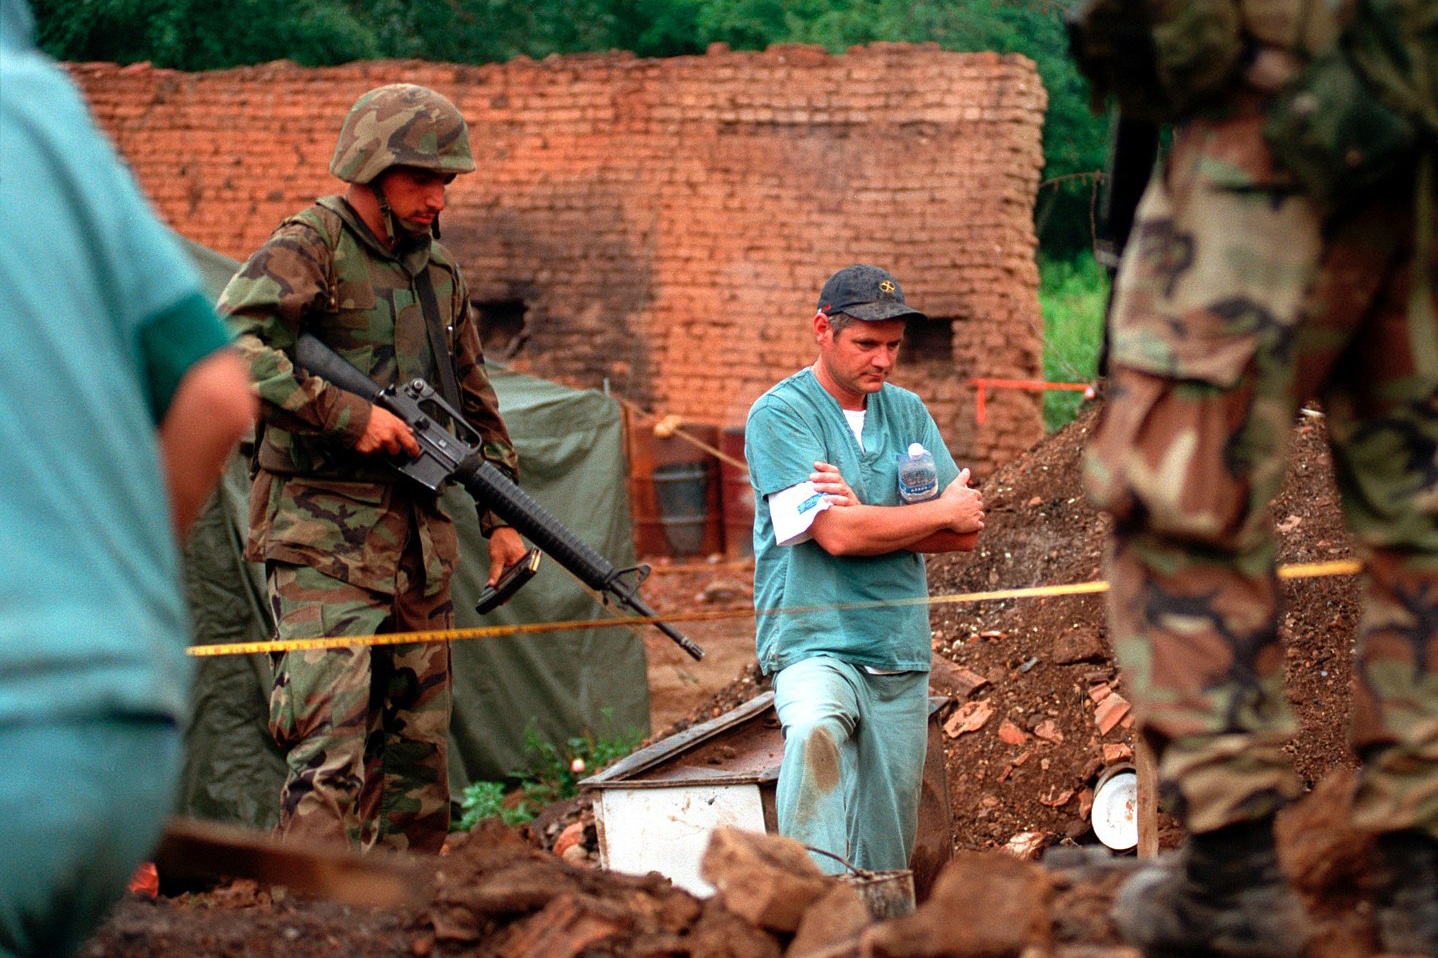 | US Marines provide security as members of the Royal Canadian Mounted Police Forensics Team investigate a grave site in a village in Kosovo on July 1 1999 | MR Online